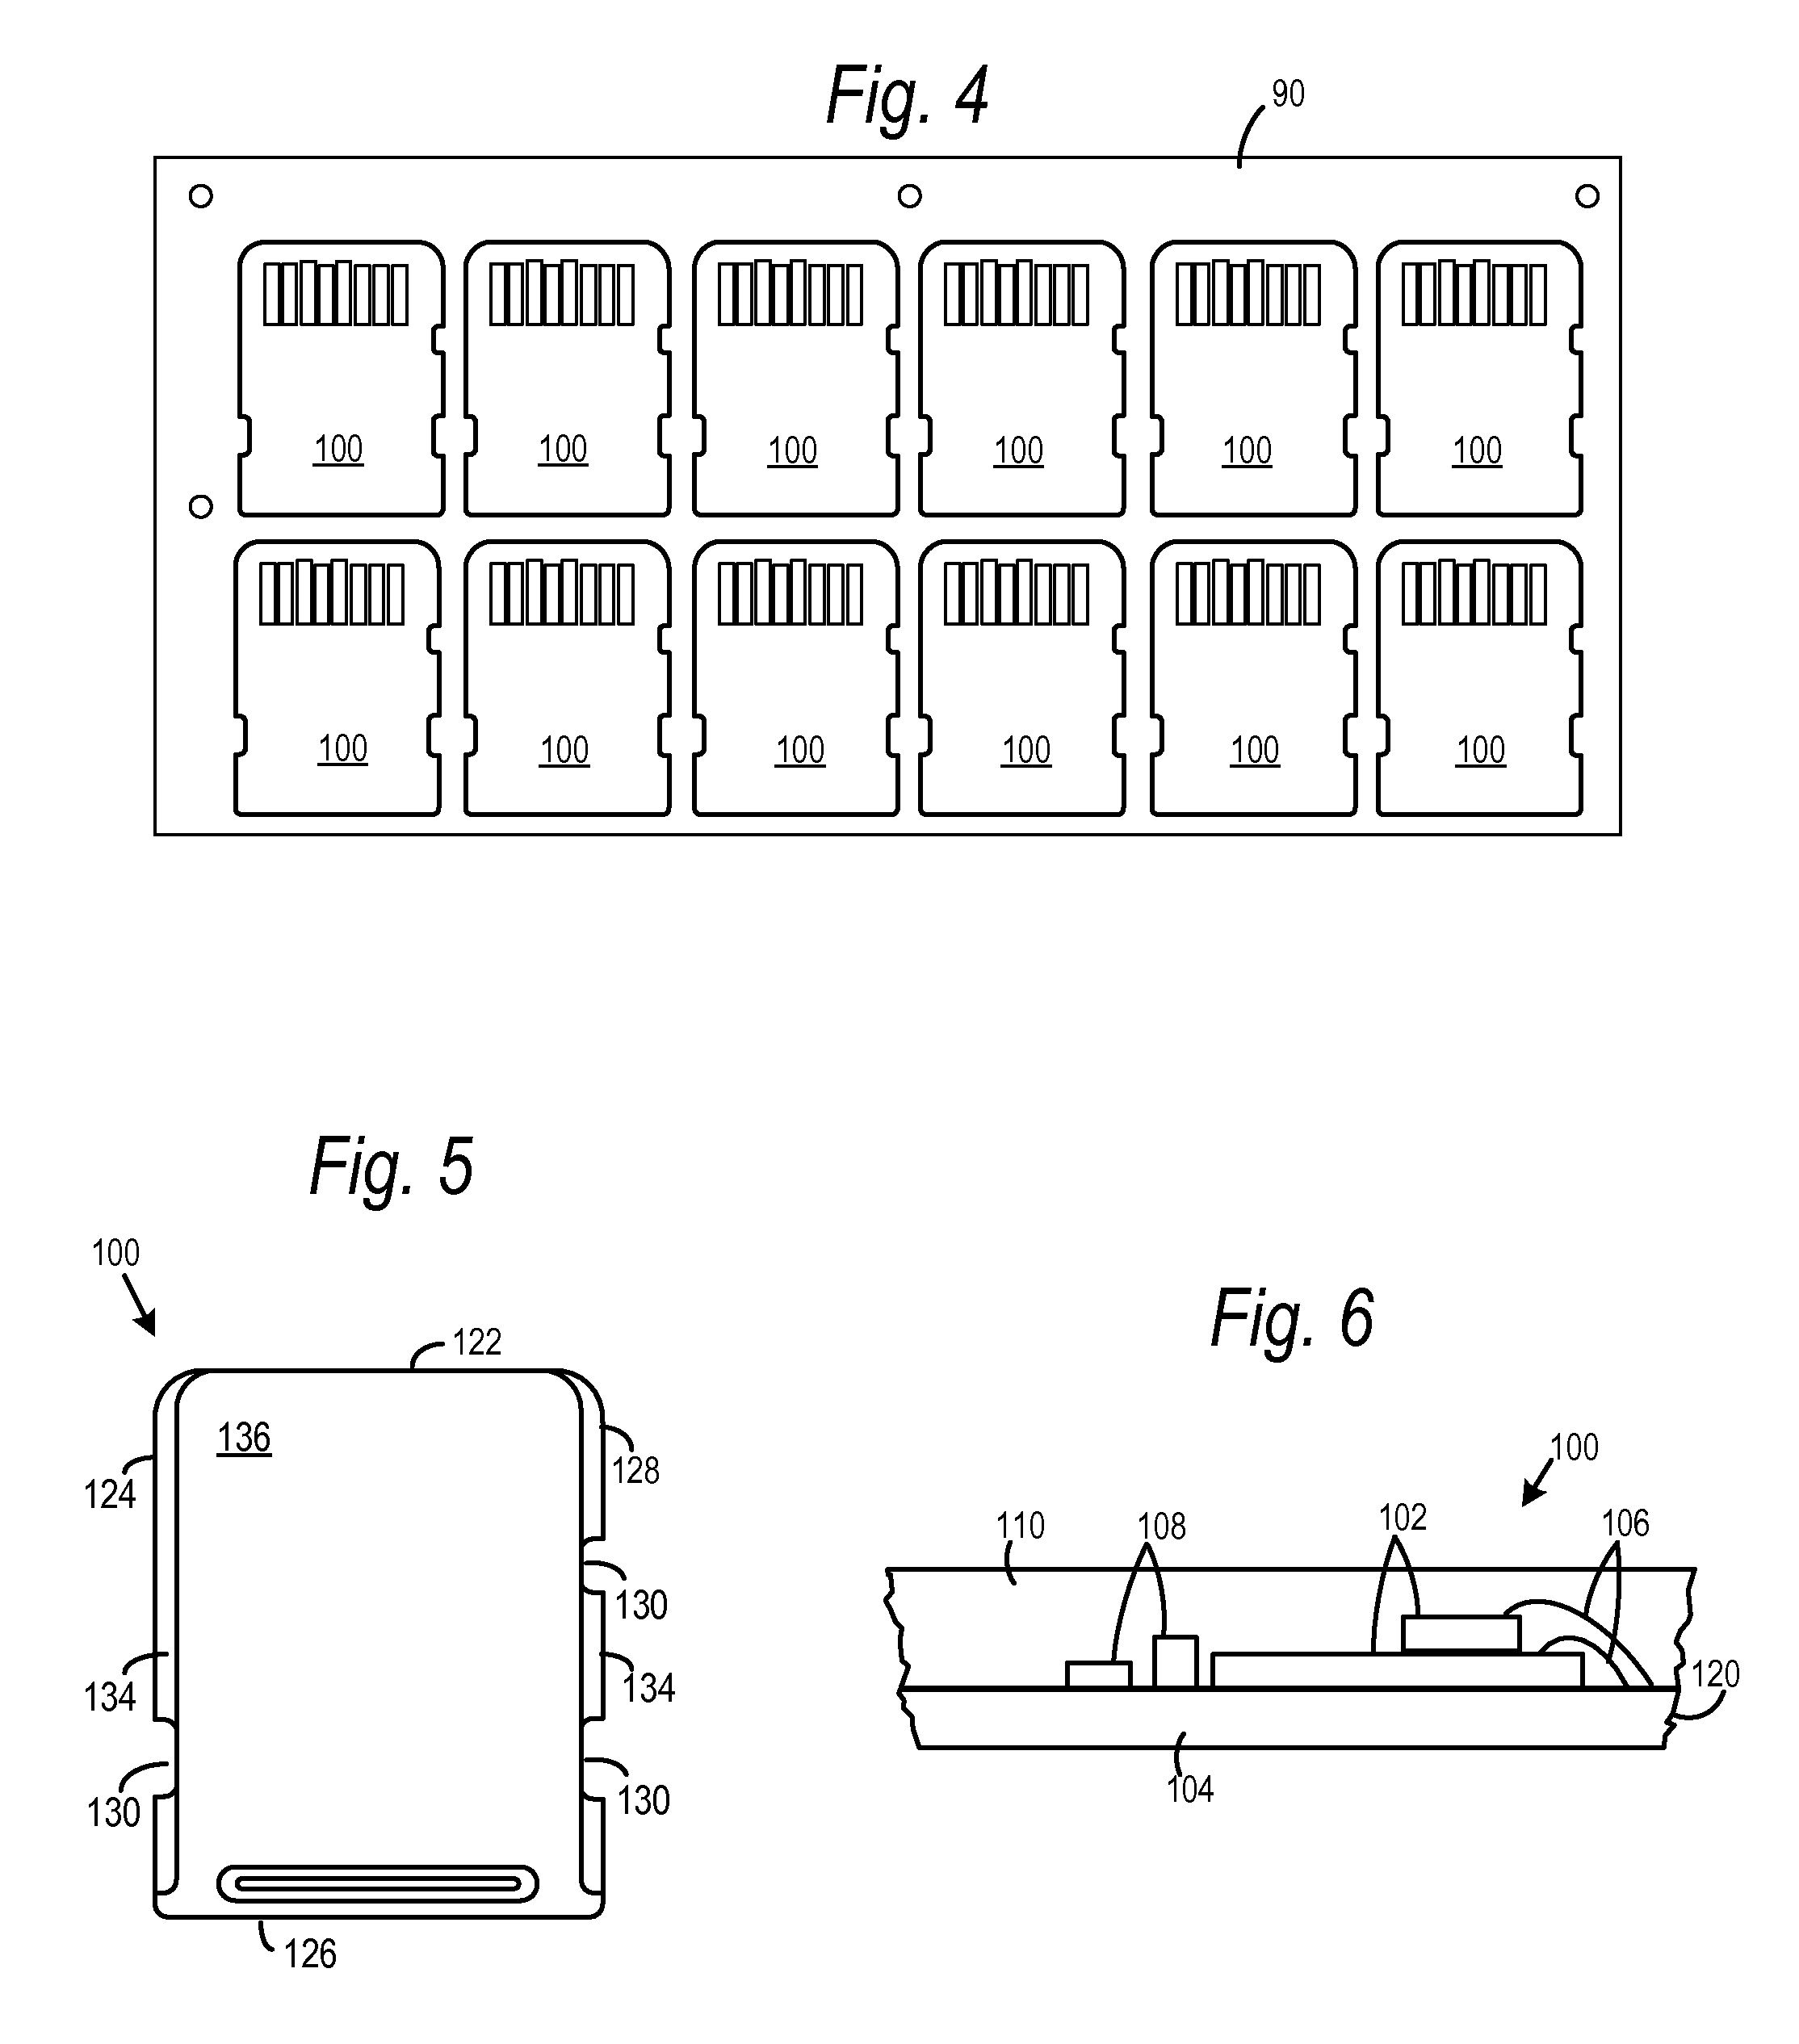 Method of reducing memory card edge roughness by edge coating